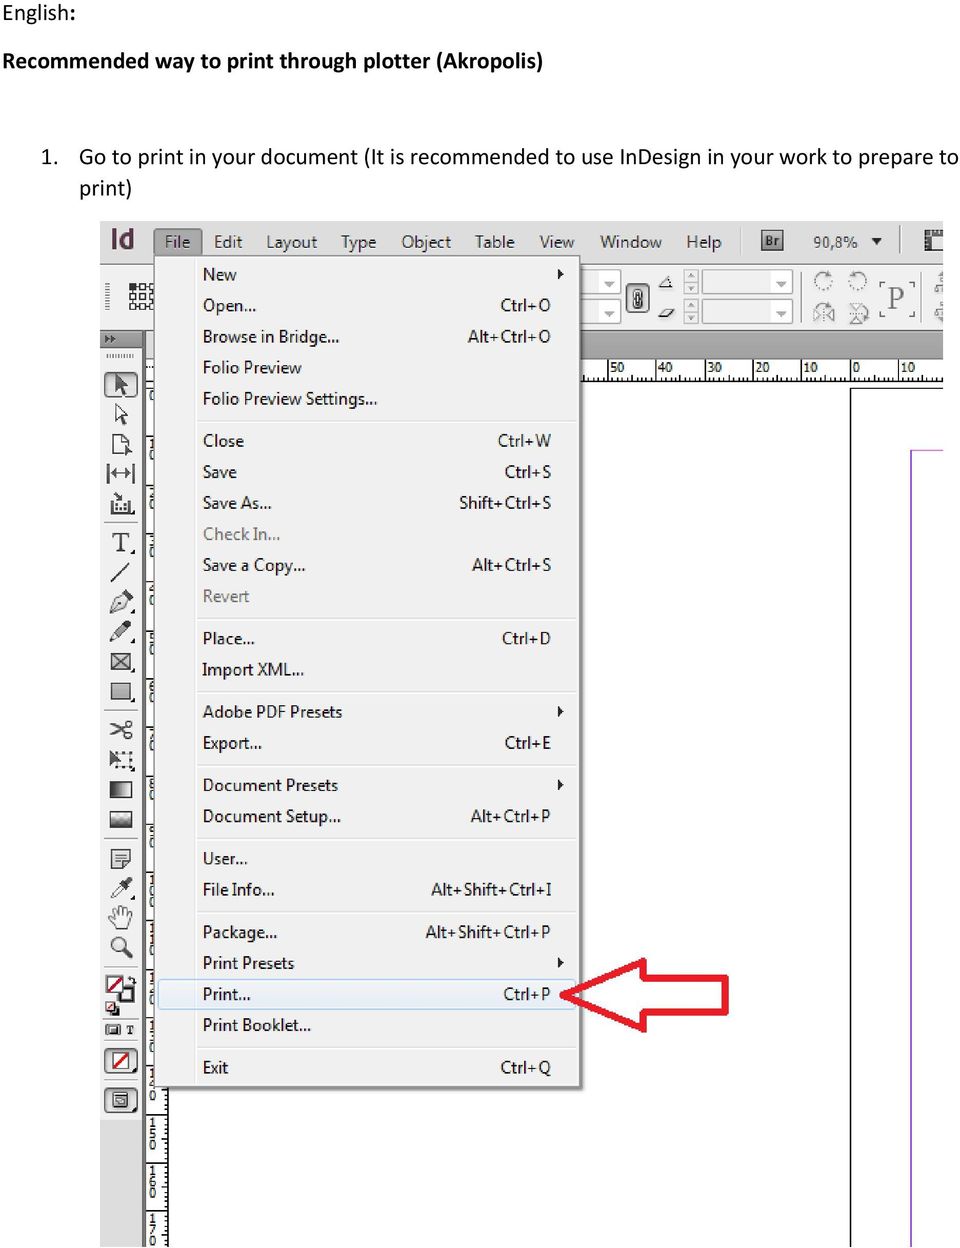 Go to print in your document (It is